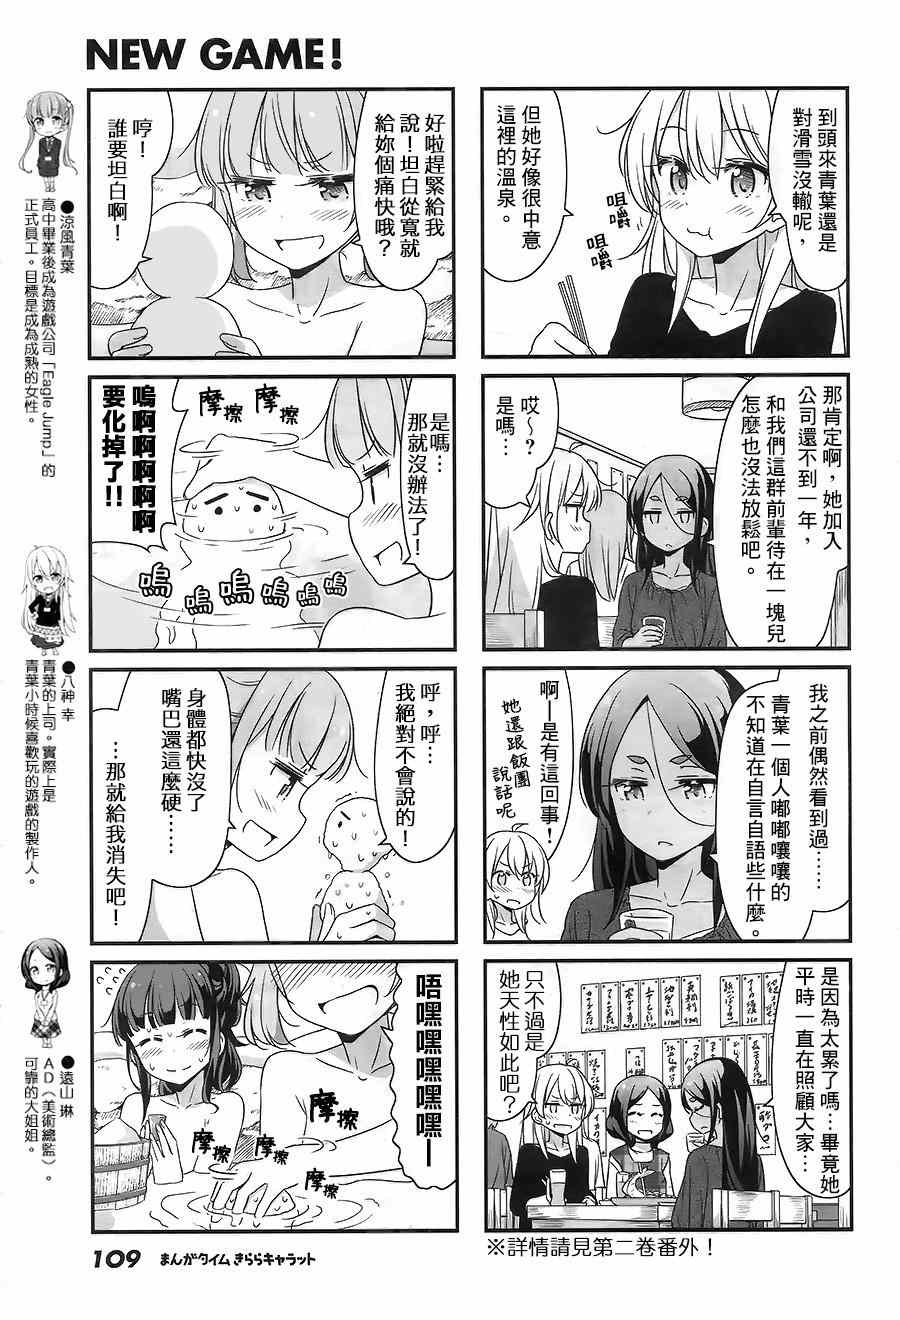 《New Game!》漫画 New Game 029集